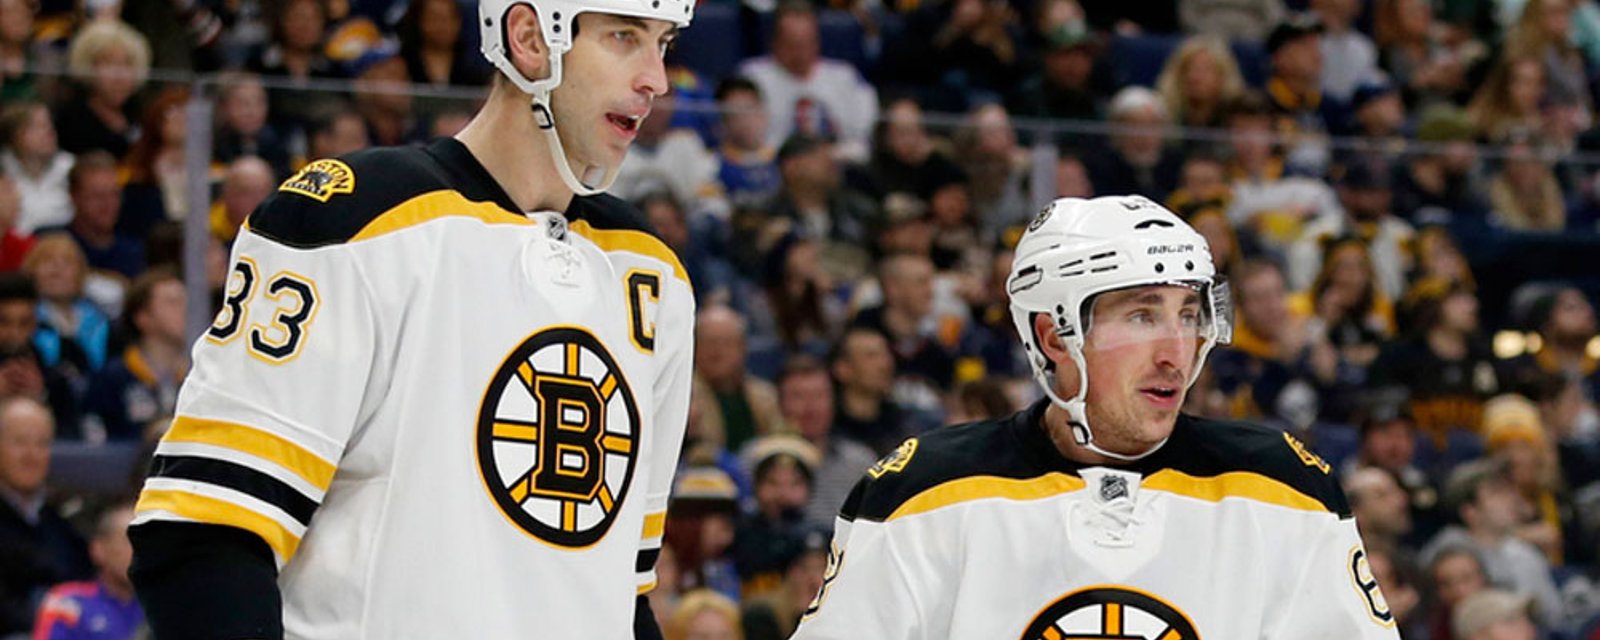 Chara roasts Marchand, calls out the “little man”